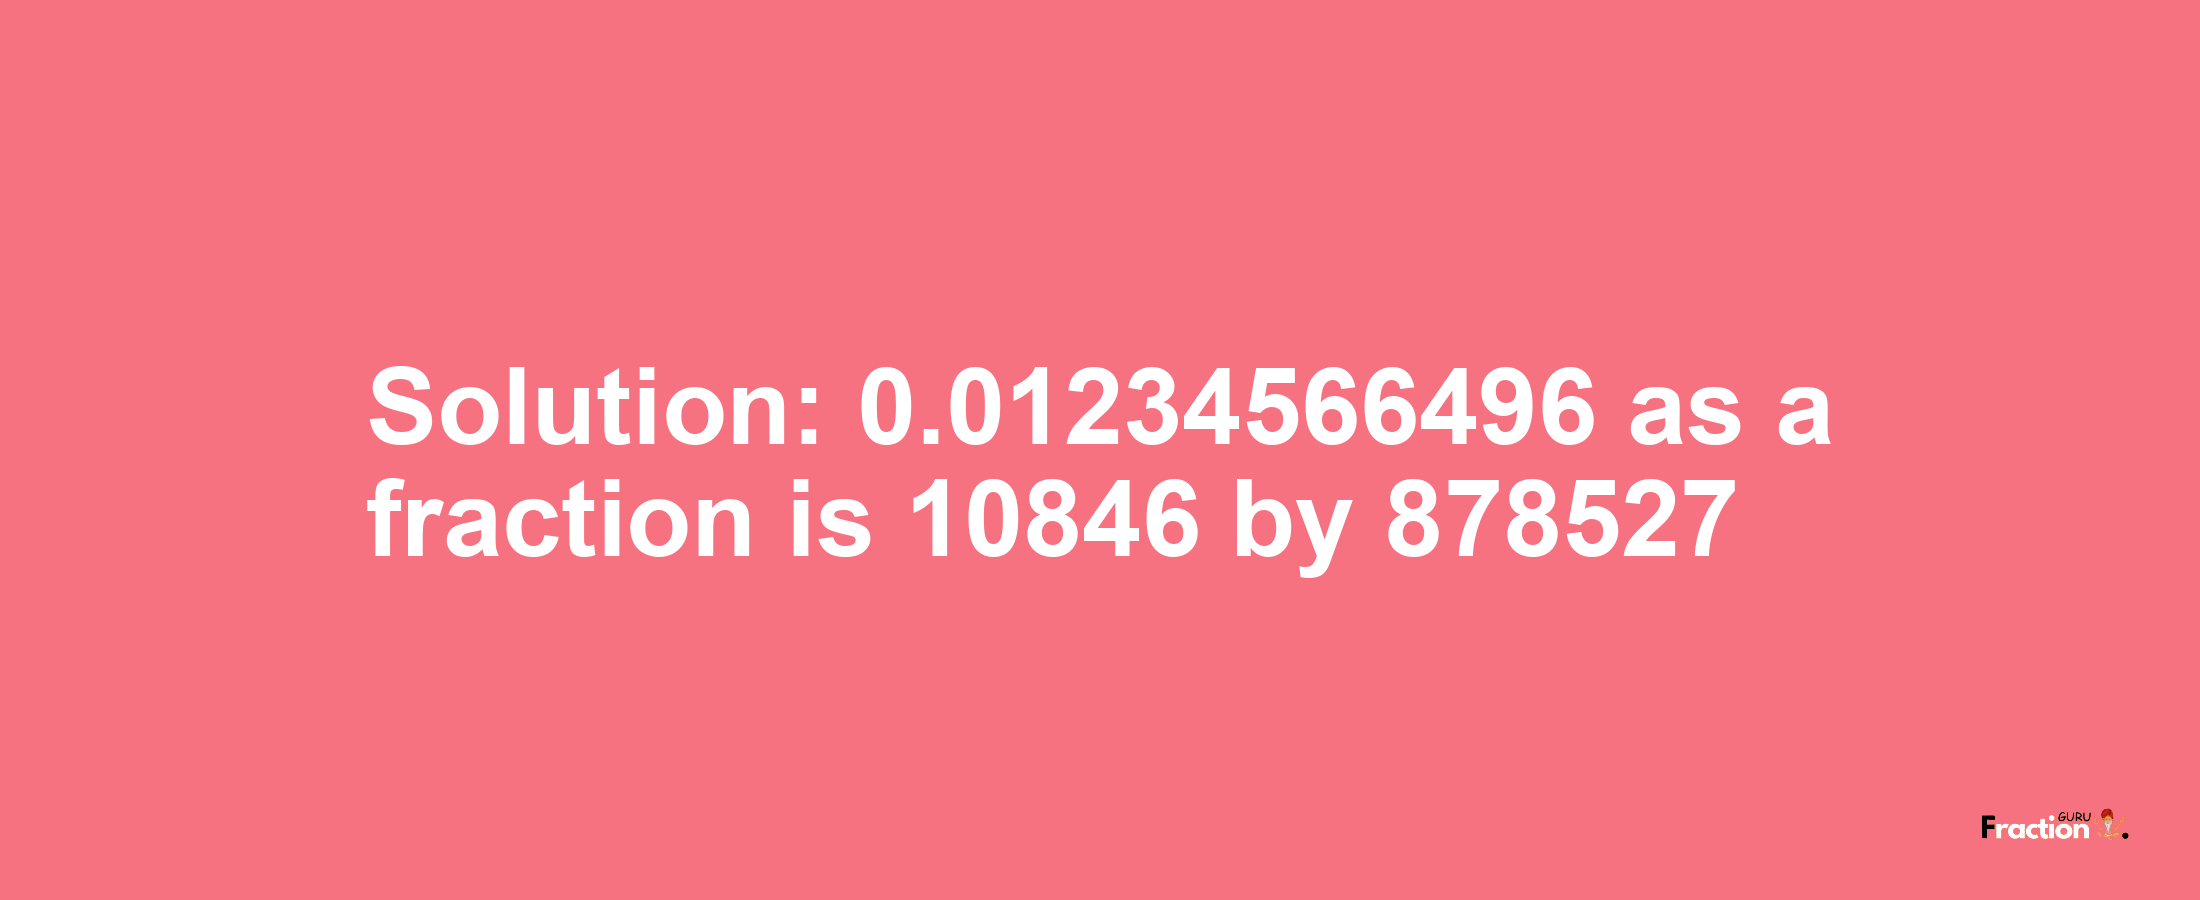 Solution:0.01234566496 as a fraction is 10846/878527